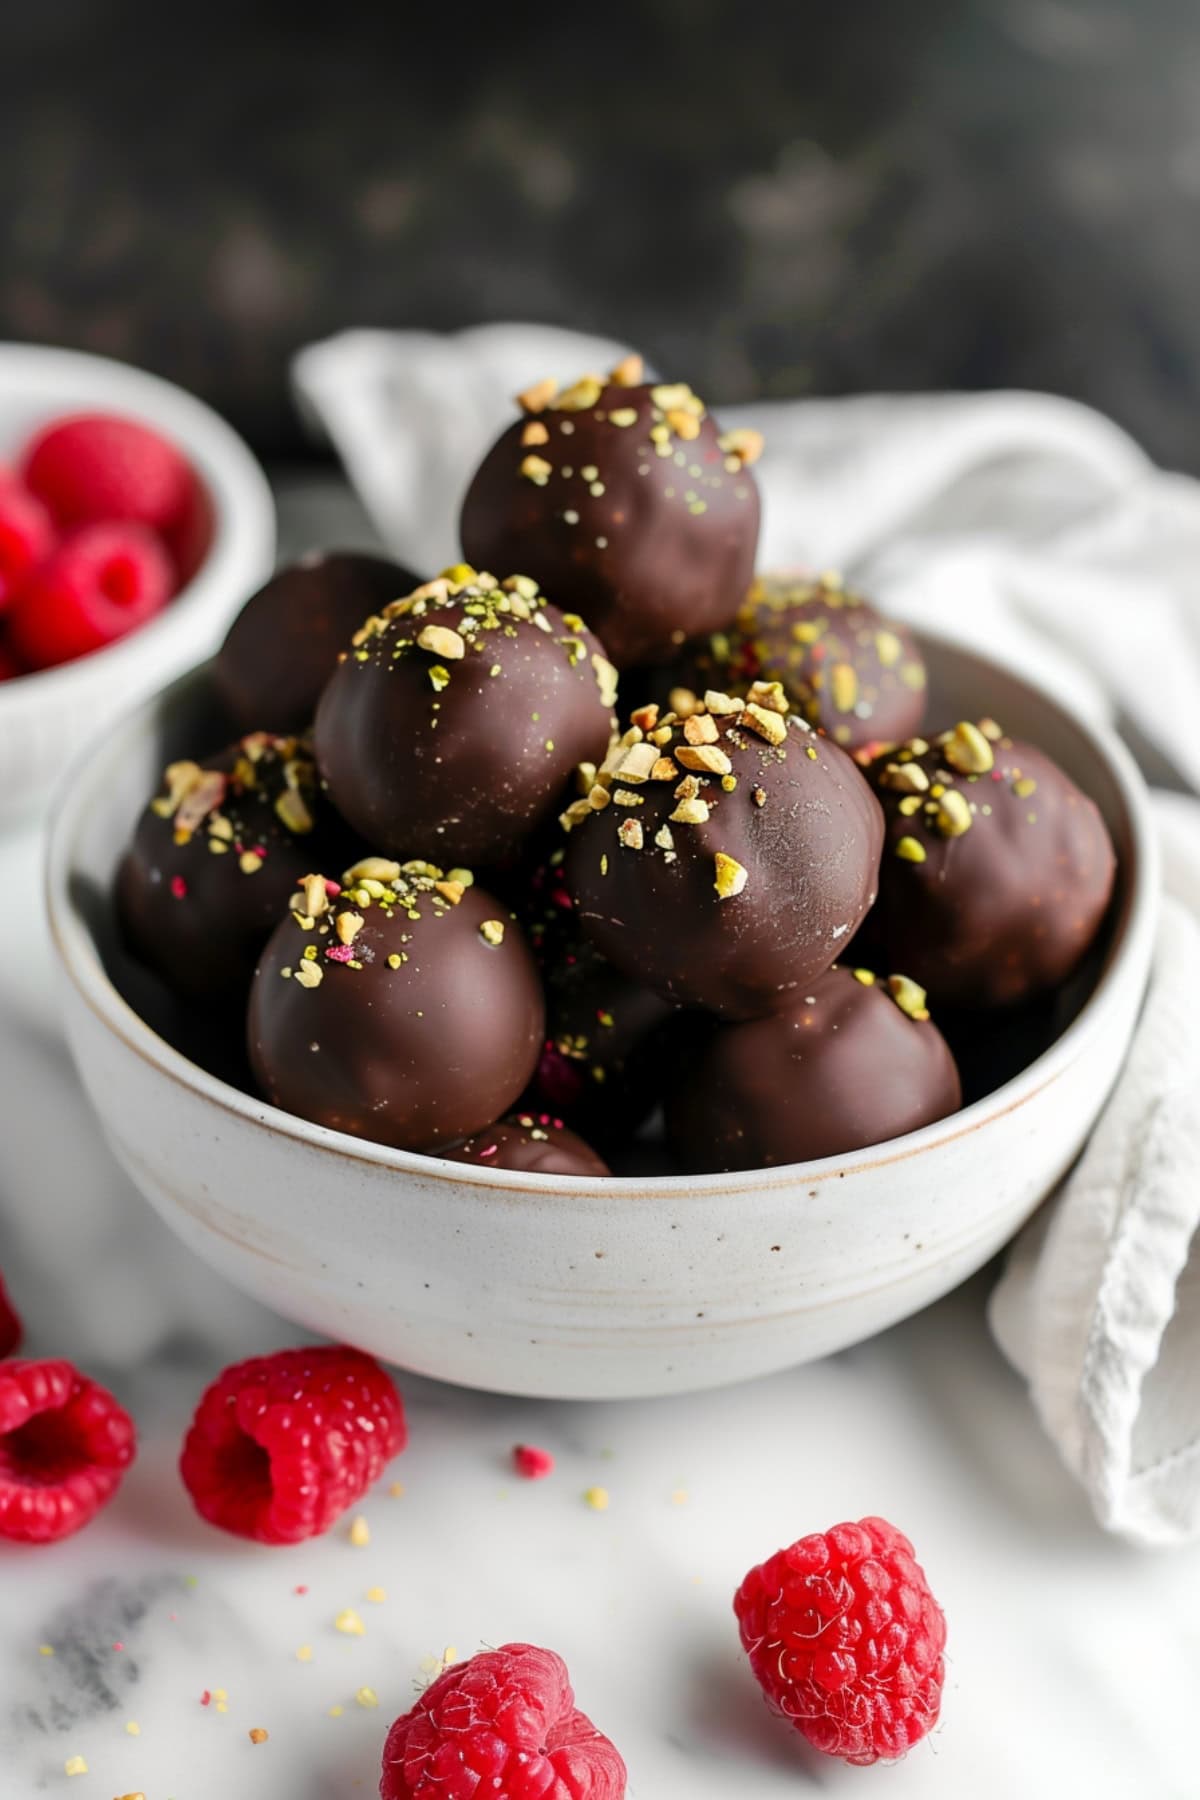 Chocolate raspberry truffles in a white bowl on a marble countertop with fresh raspberries on the side